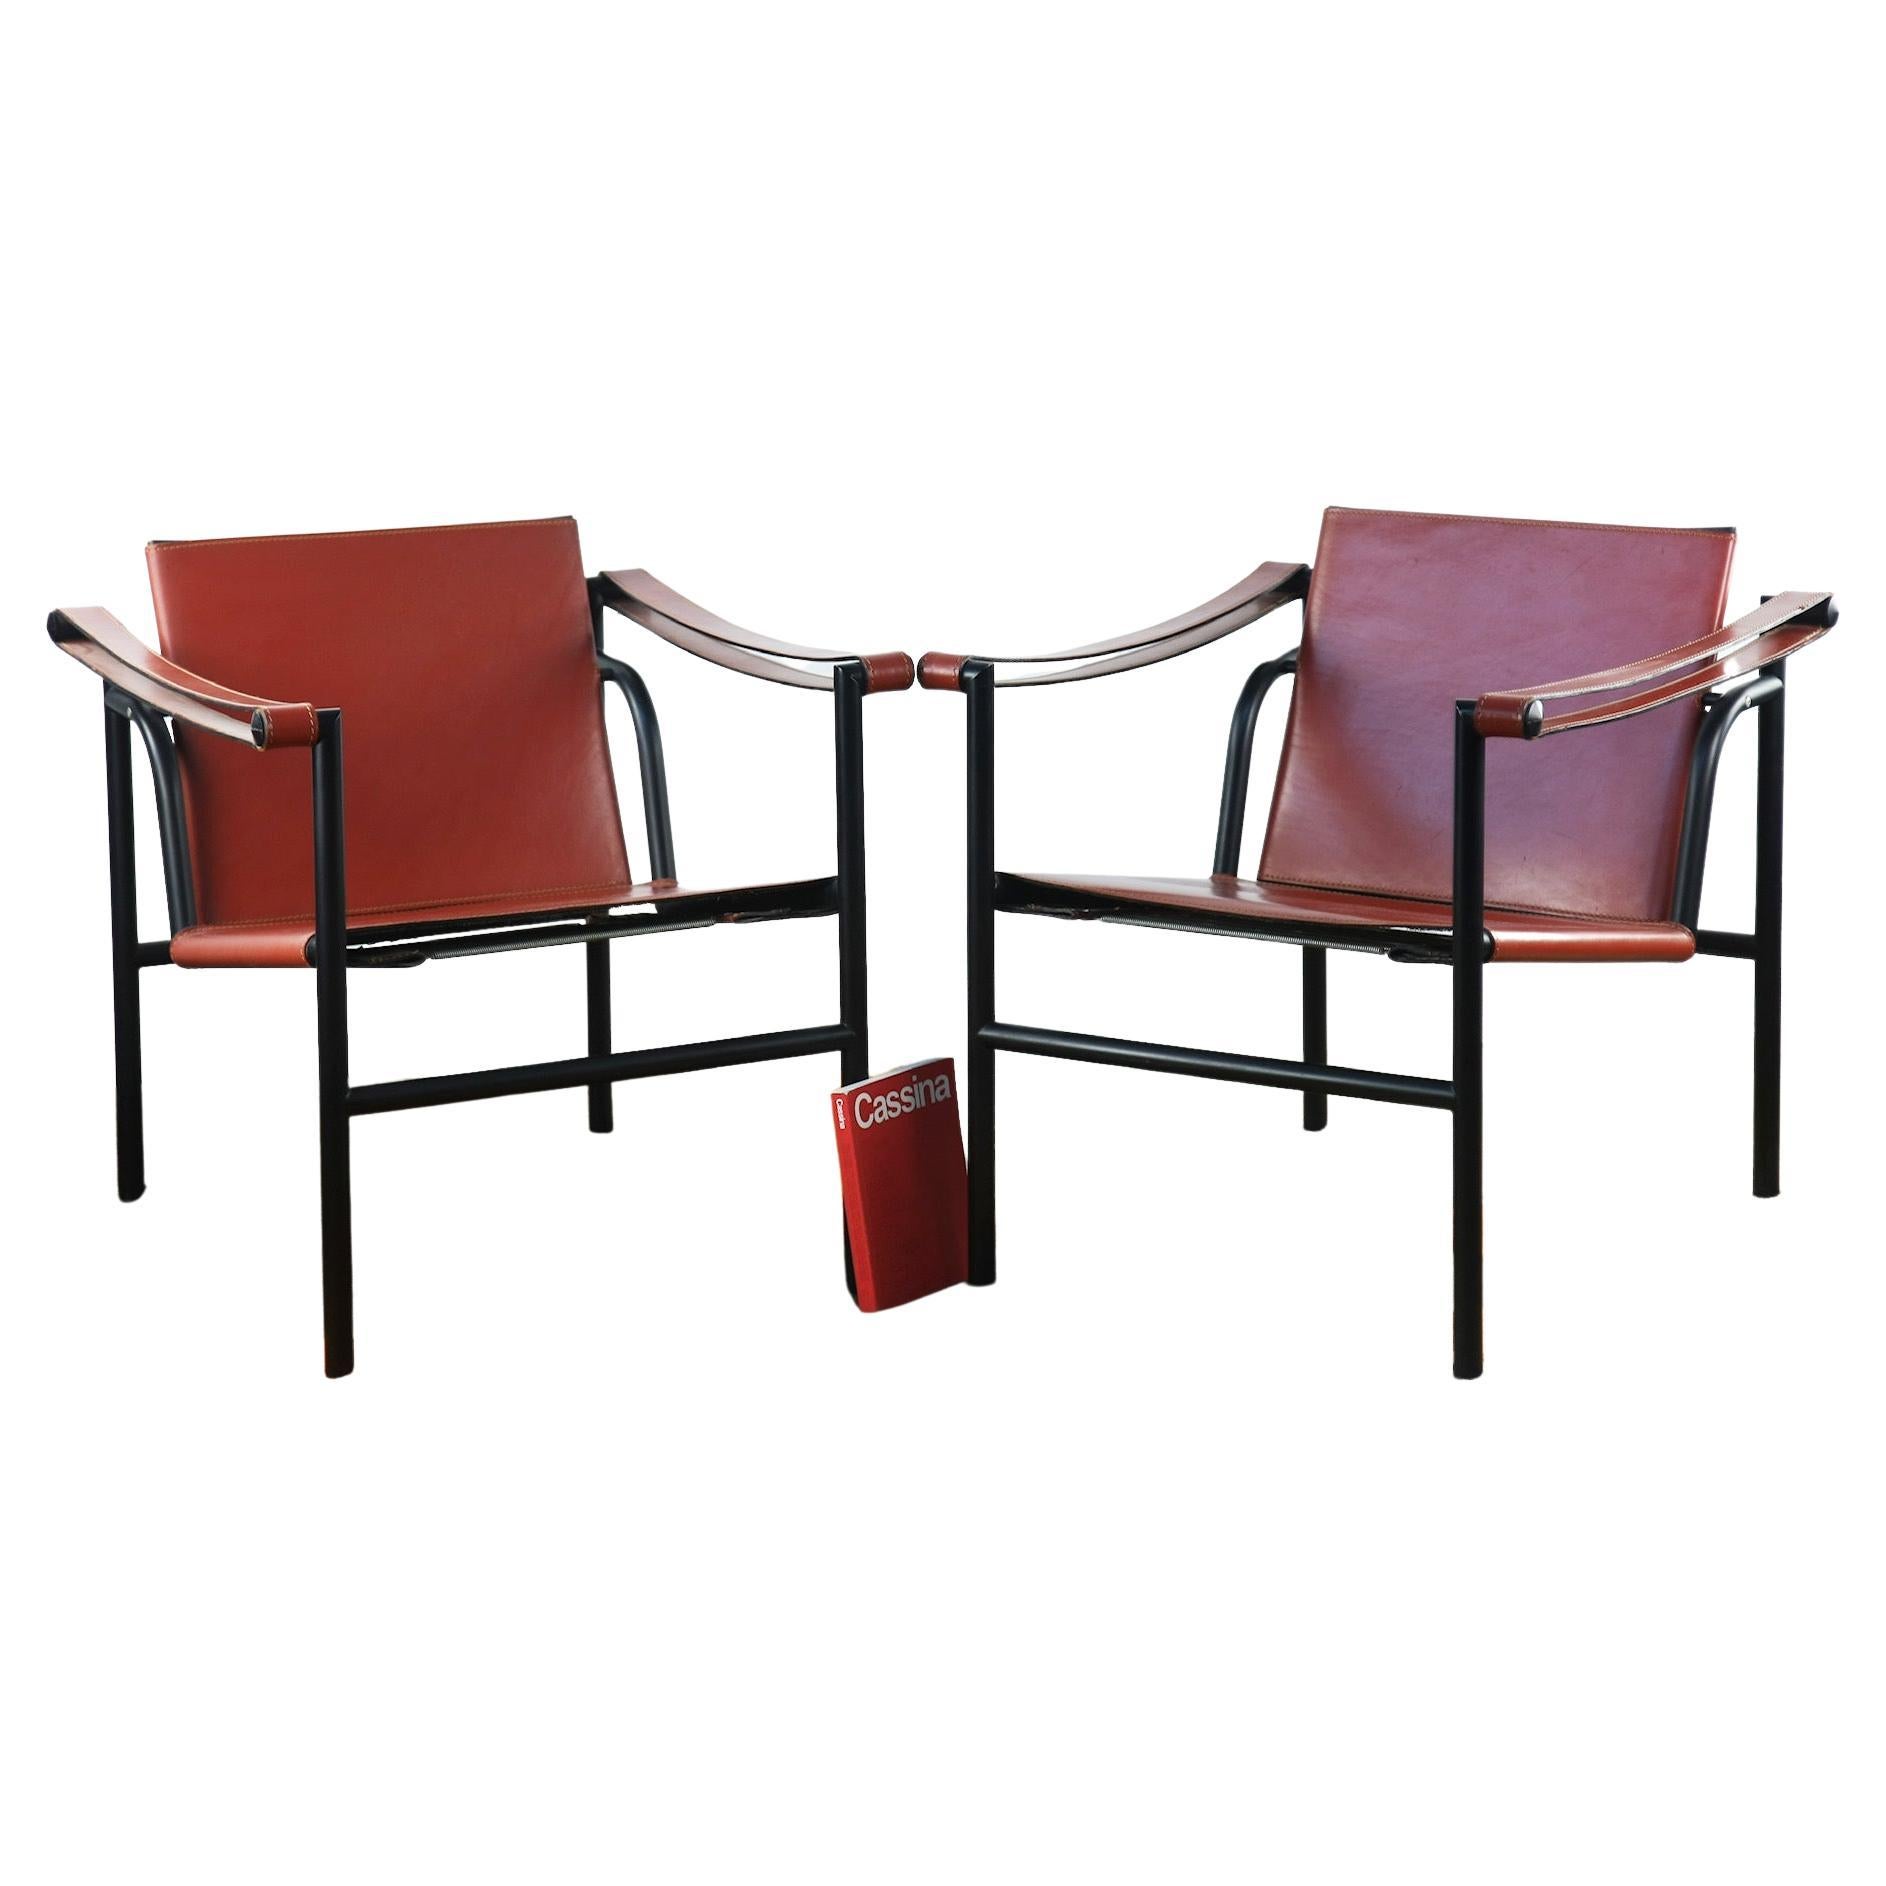 LC1 "Le Corbusier" by Cassina n 22066 - 22067 with black frame For Sale